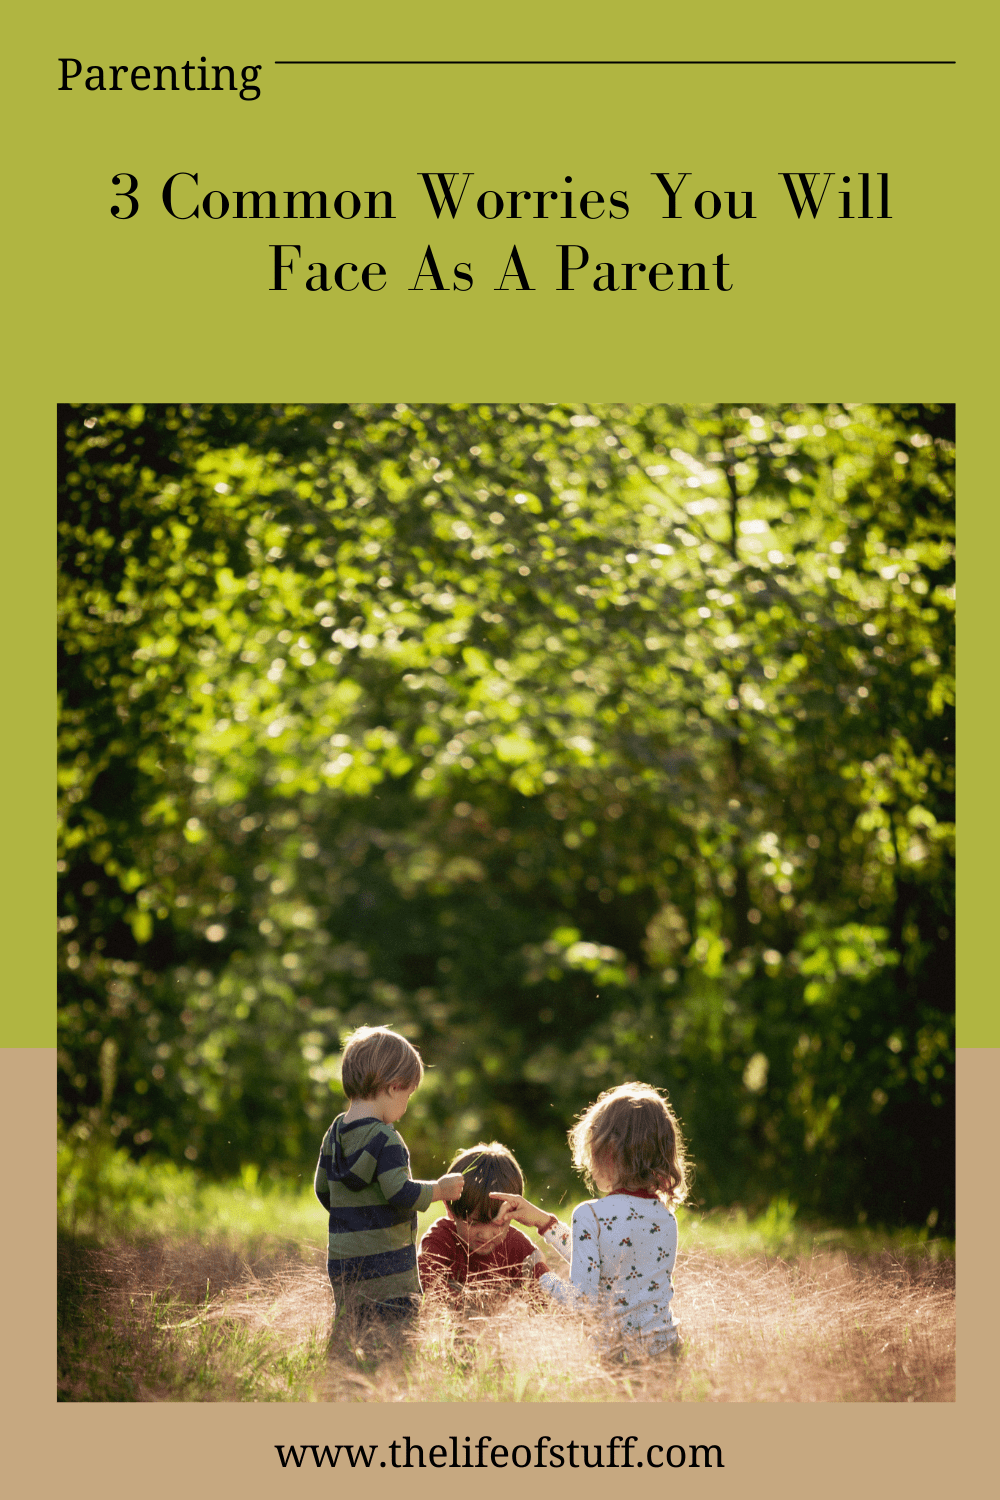 3 Common Worries You Will Face As A Parent - The Life of Stuff